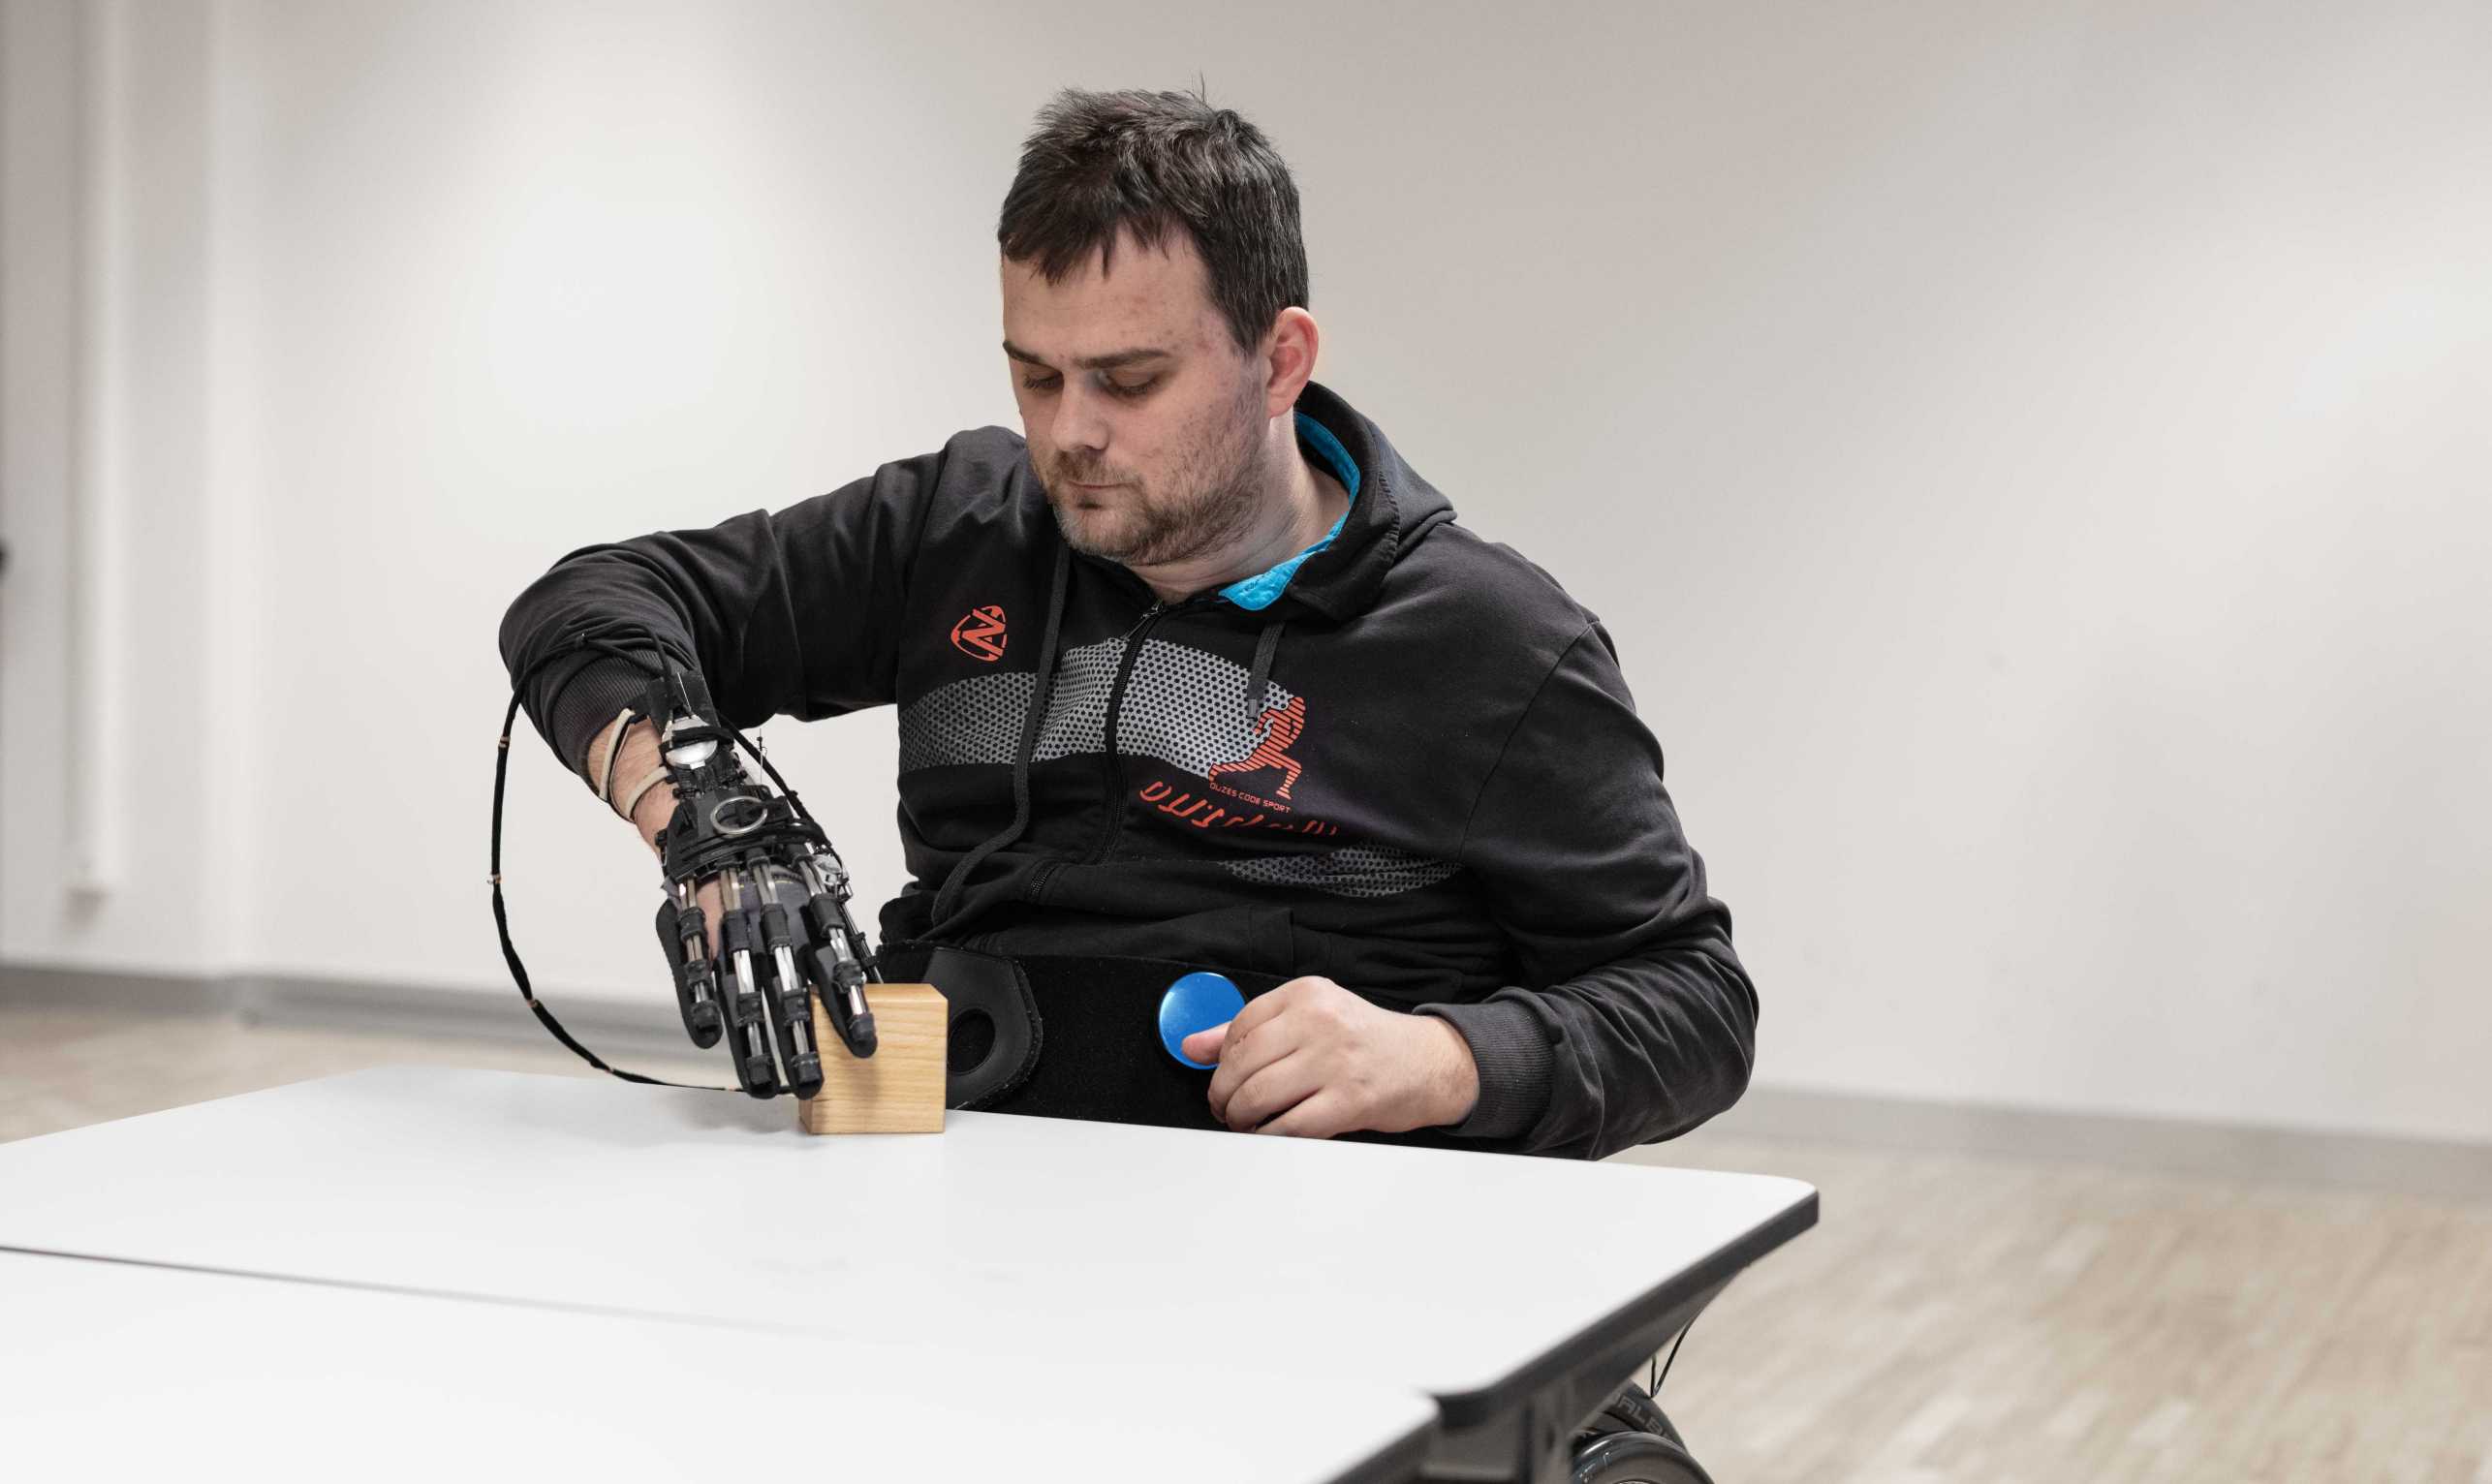 Person with limited function of the right hand lifts a wooden cube with the help of a hand exoskeleton